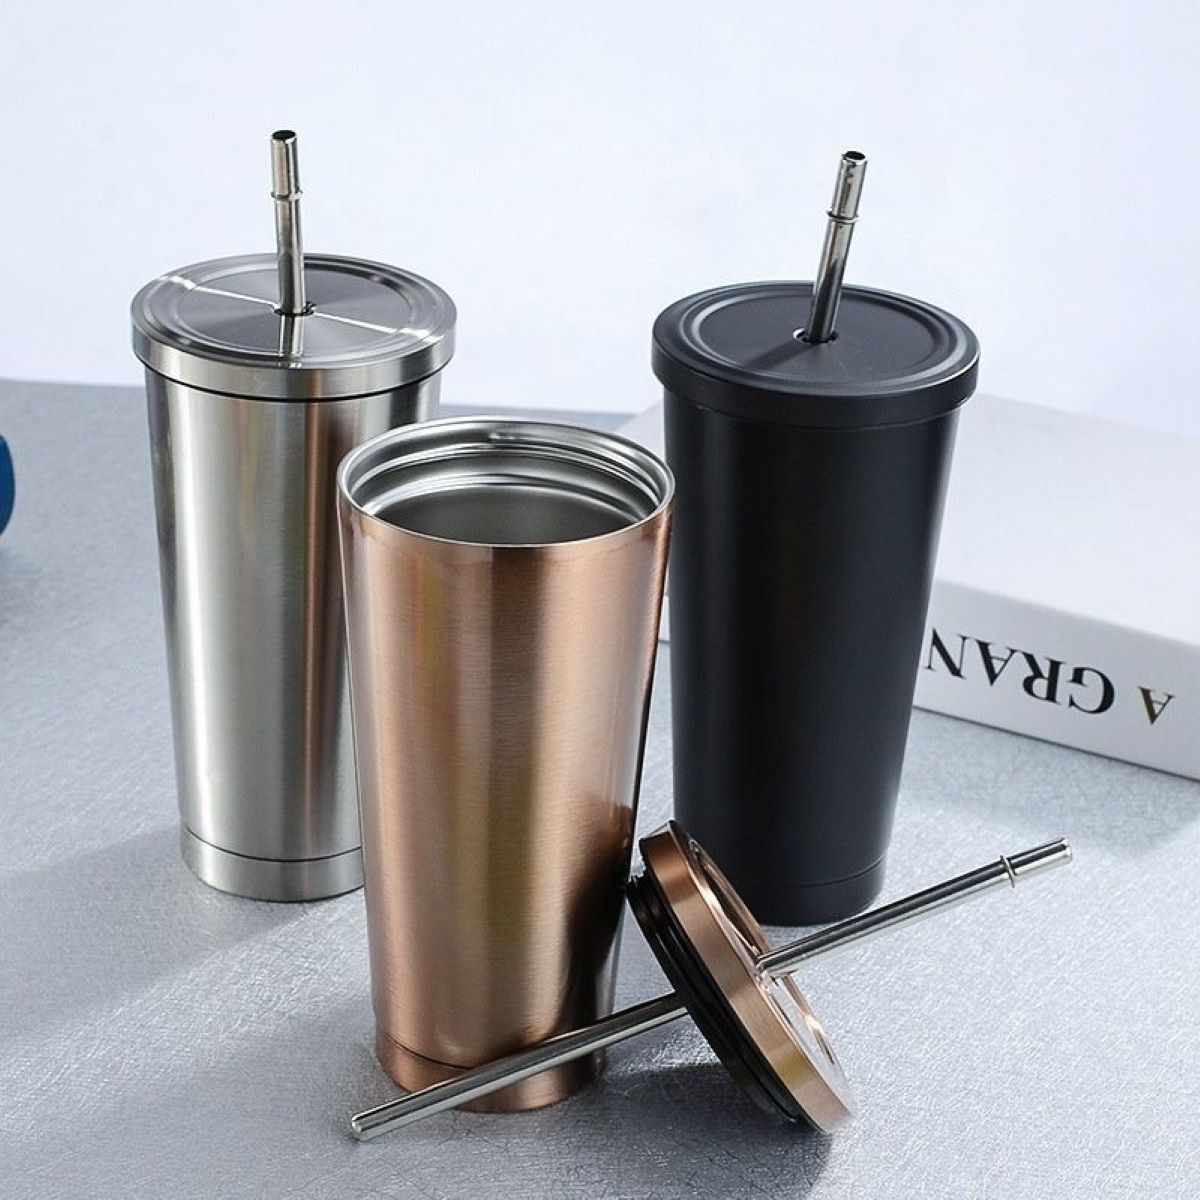 China Iced Coffee Cups Reusable Wide Mouth Smoothie Cups With Lids and  Silver Straws Mason Jar Glass Cups manufacturers and suppliers